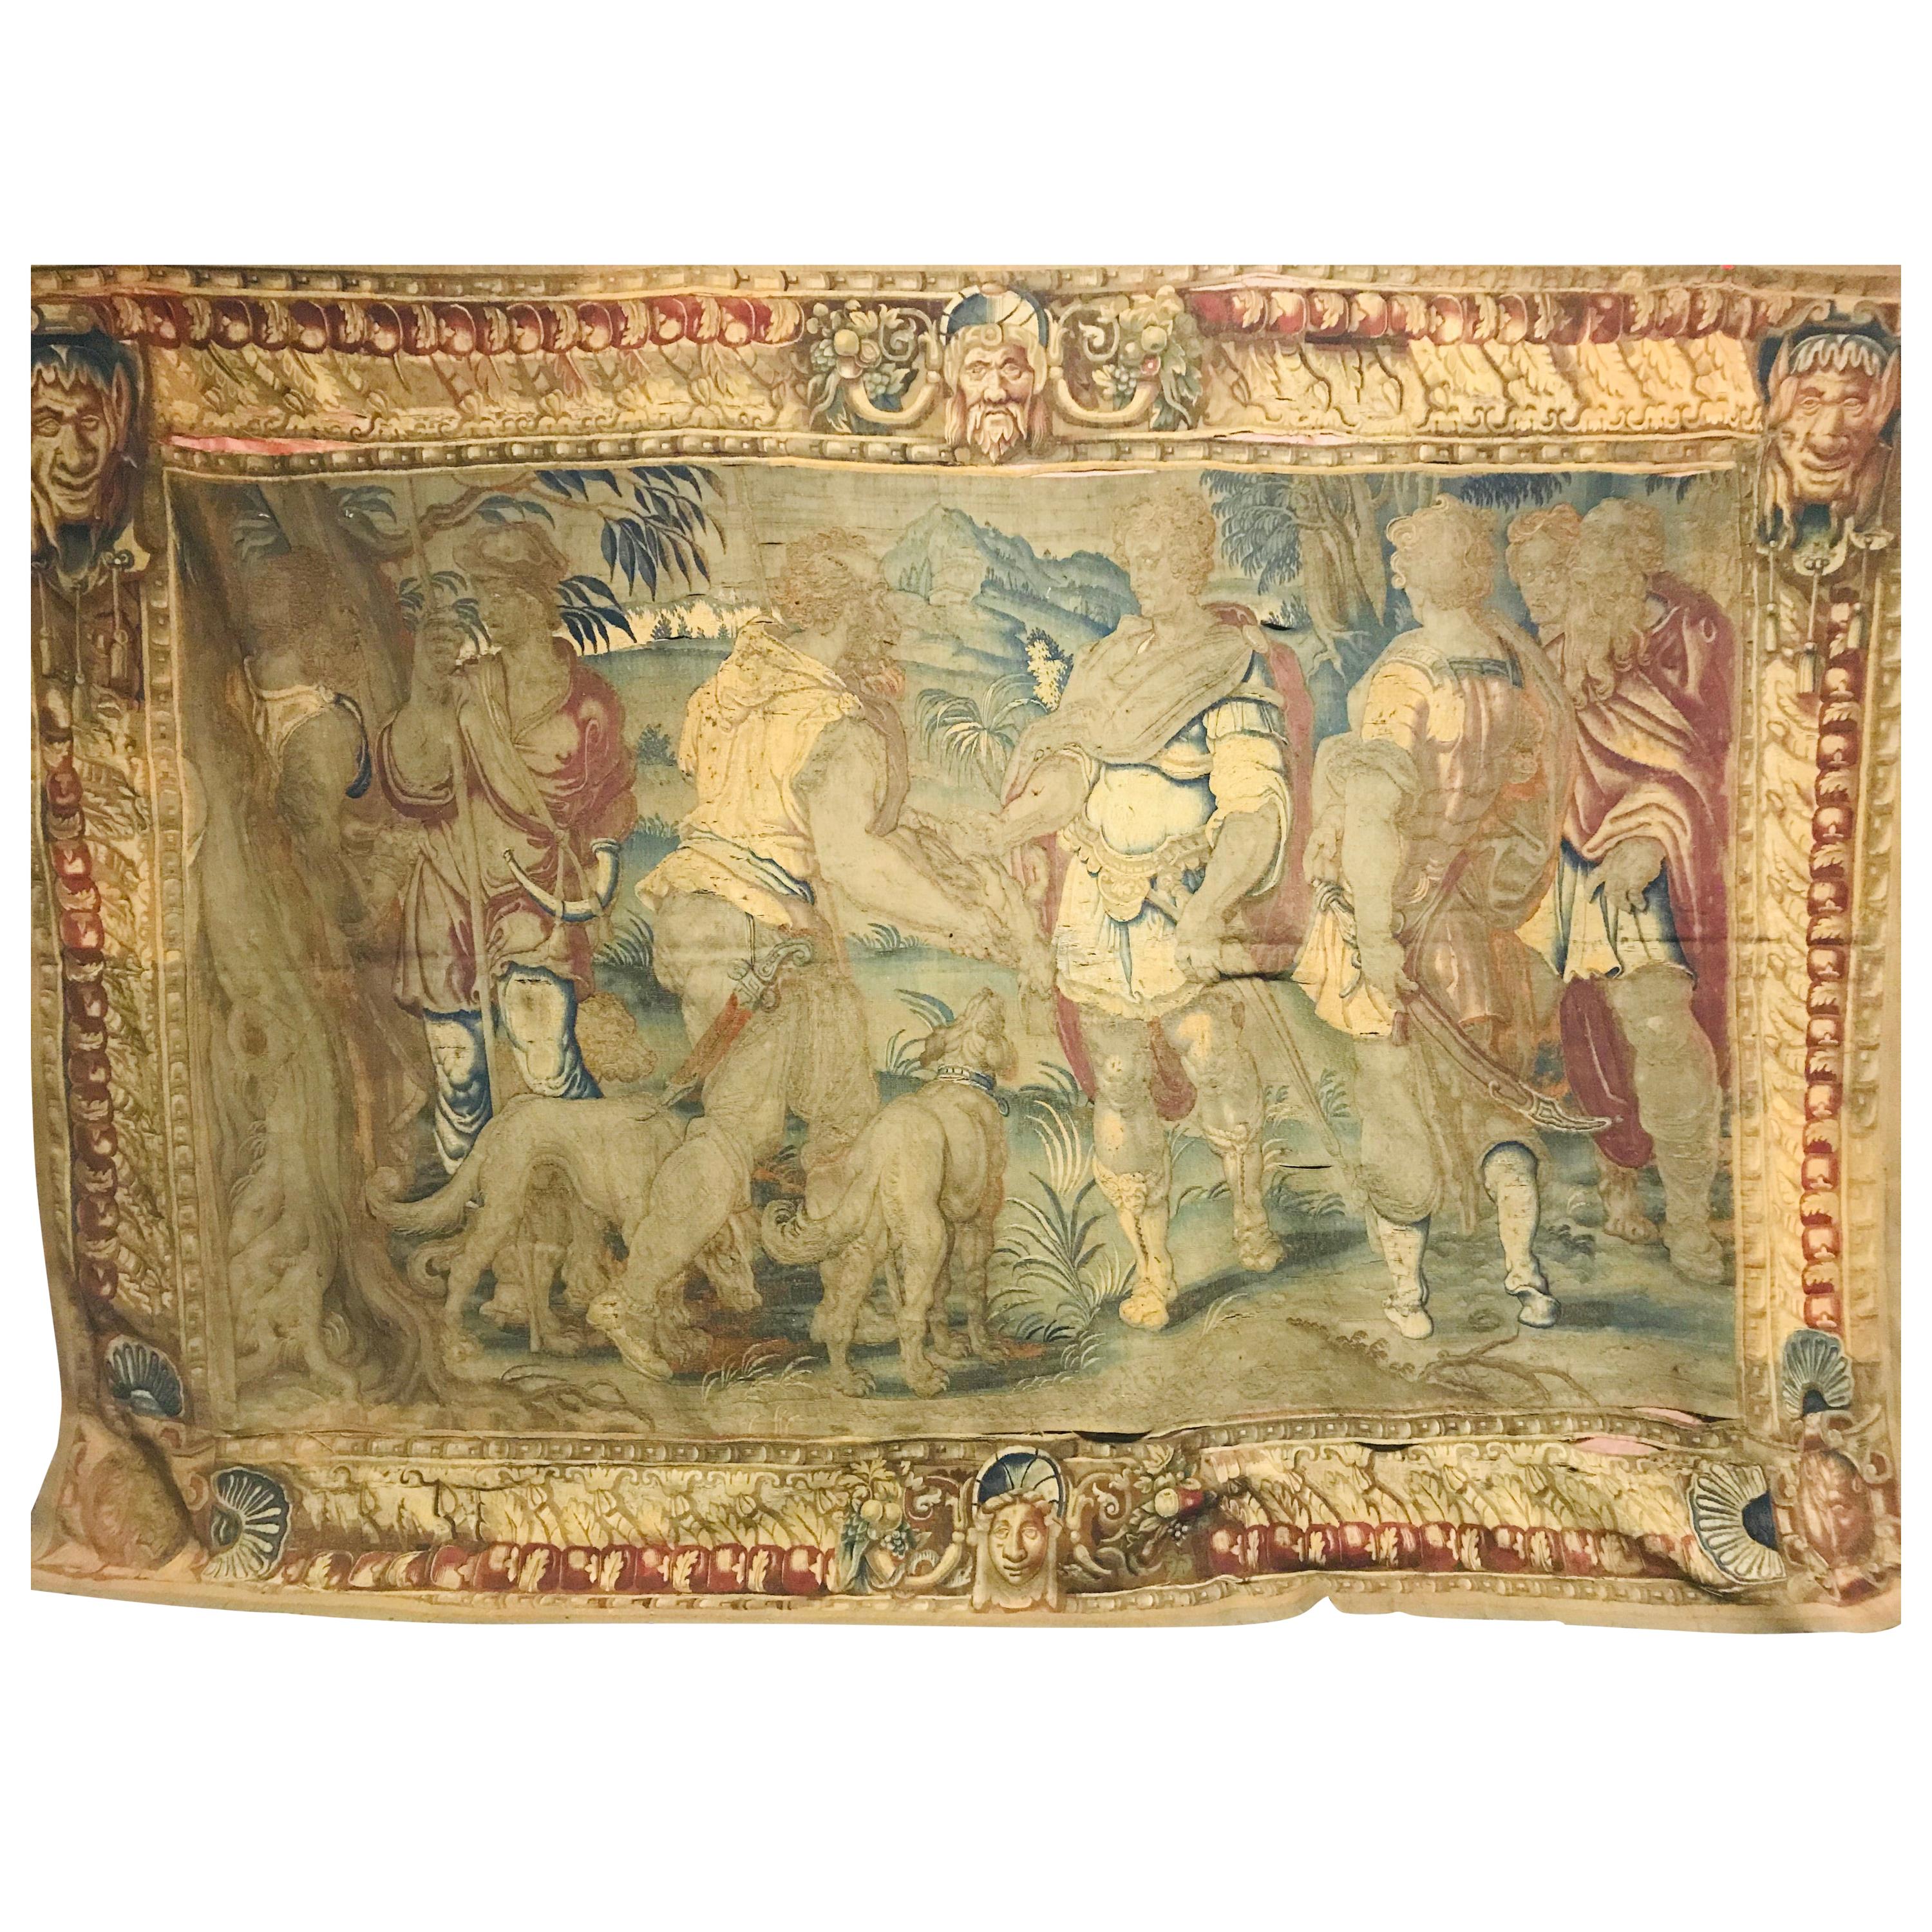 Museum Piece from the 16th-17th Century, Renaissance Style Tapestry Canvas